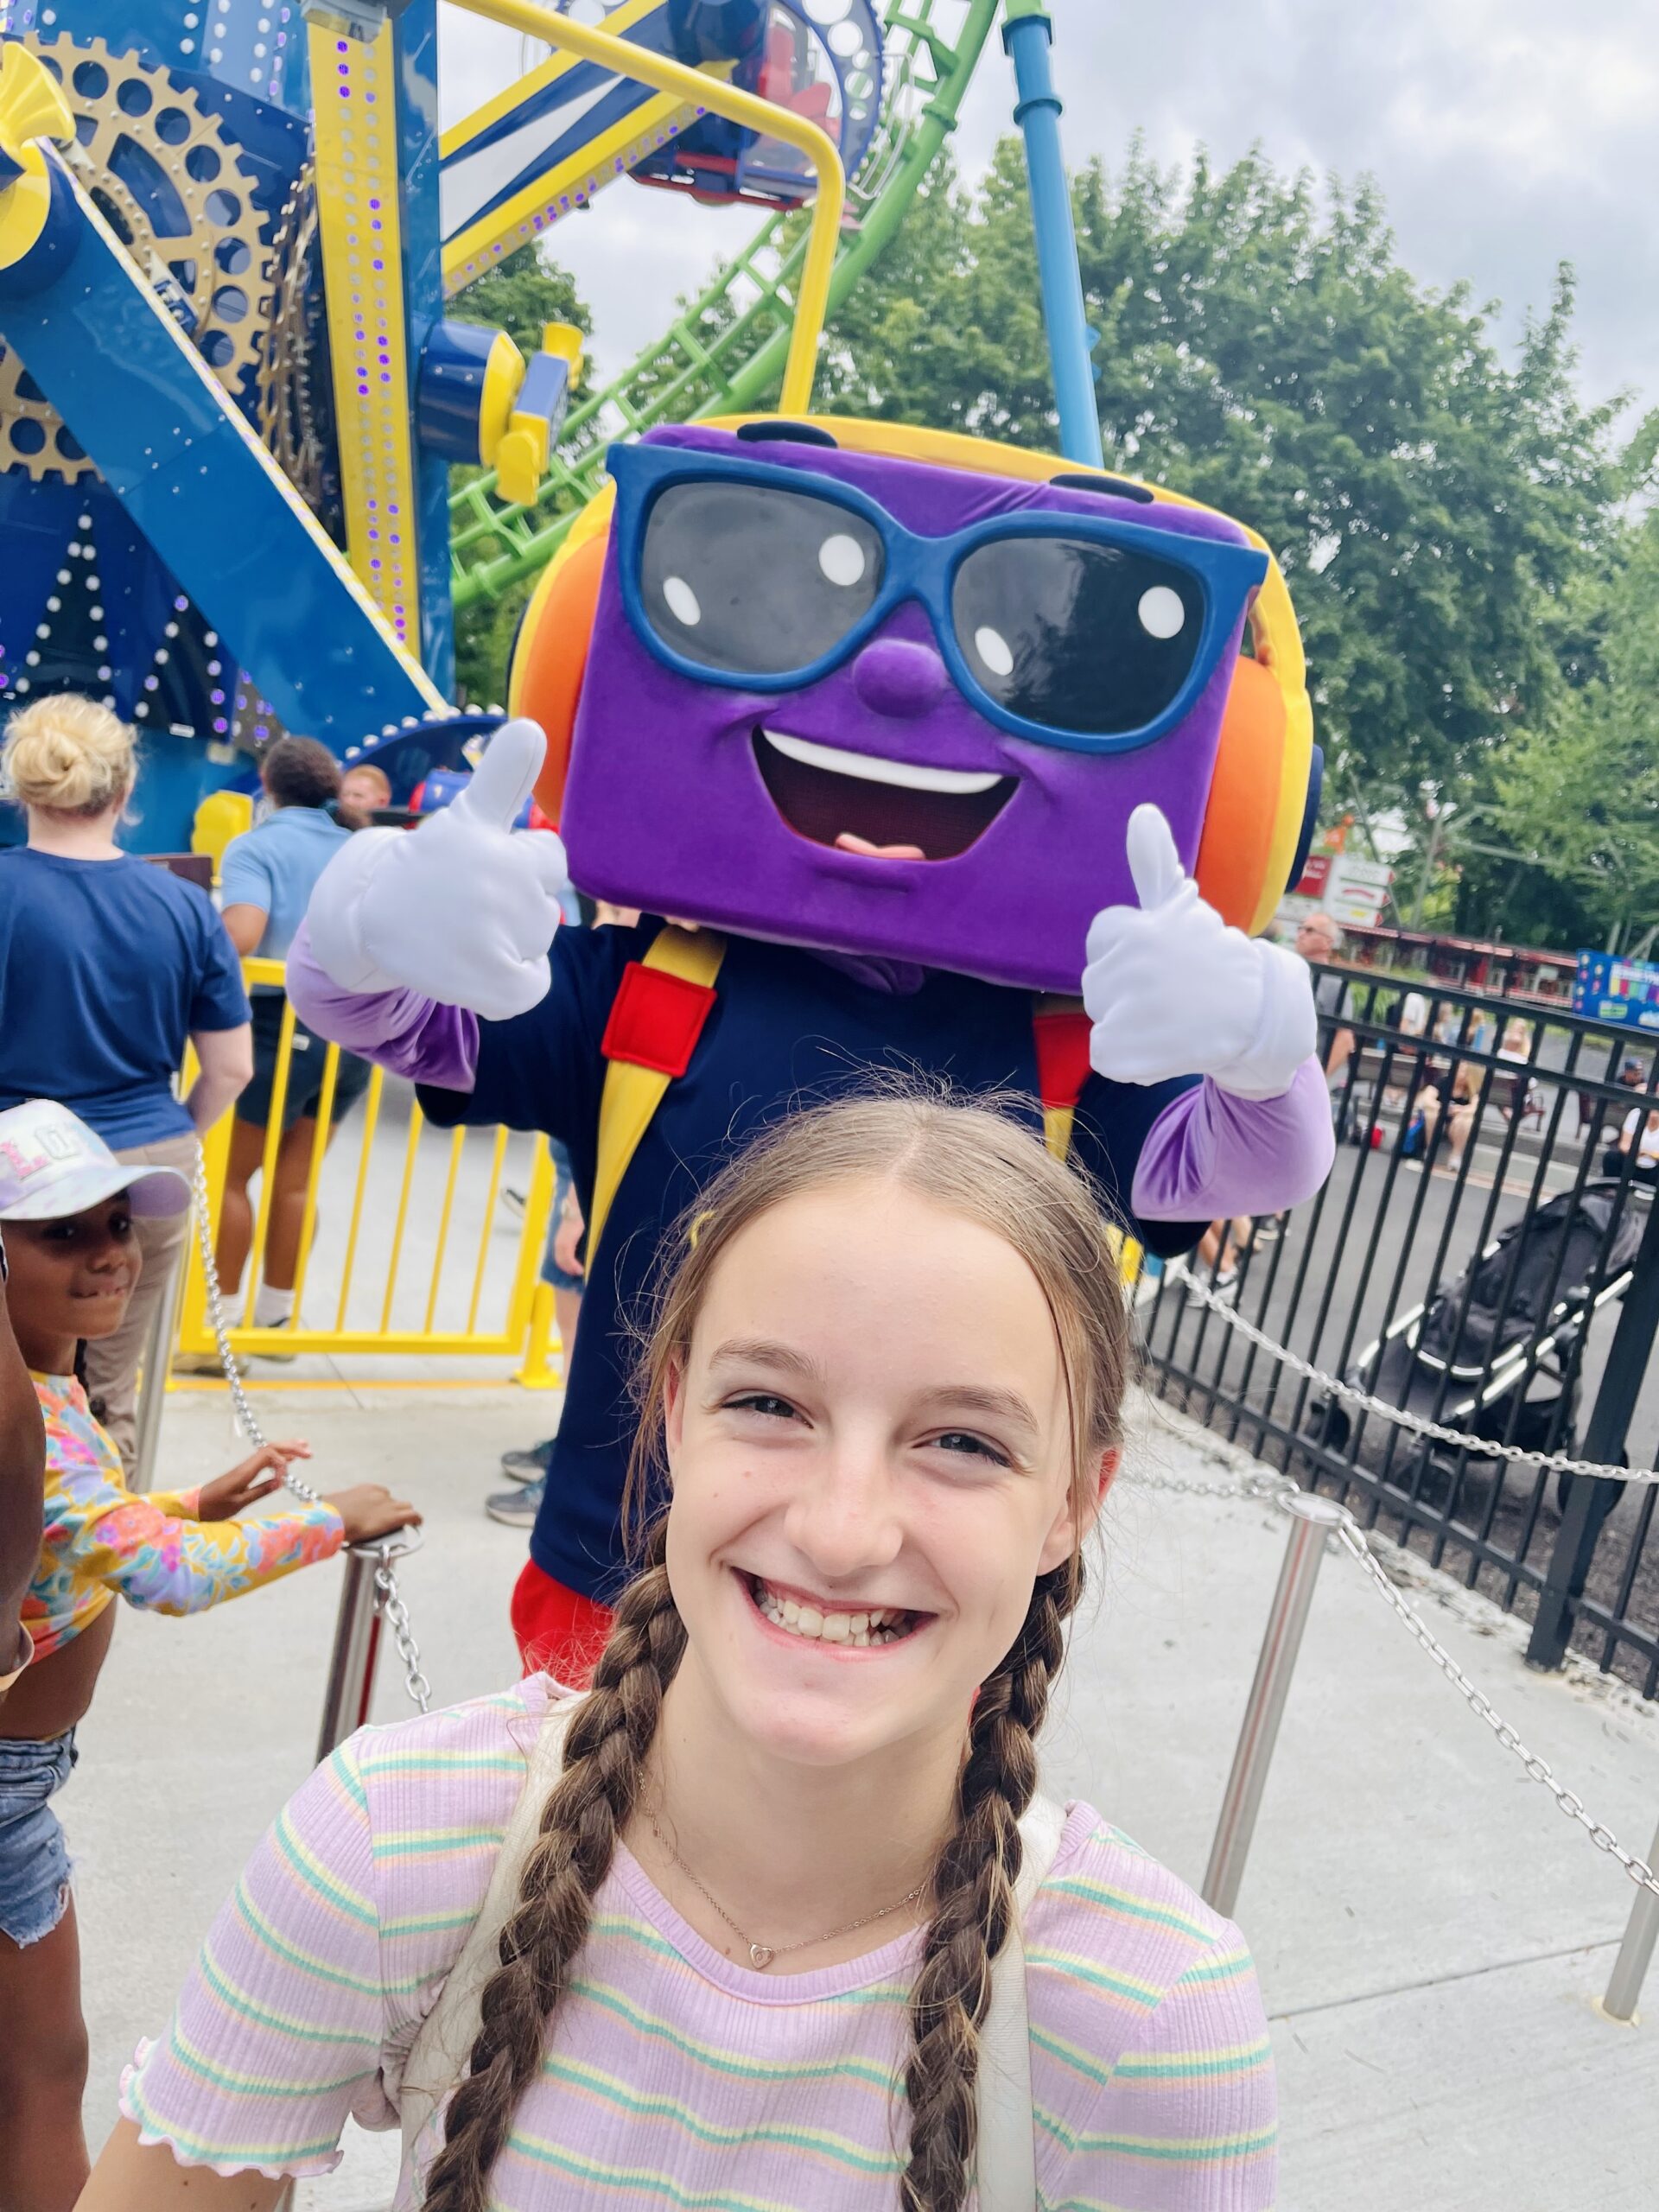 All New Jolly Rancher Attractions and Treats at Hersheypark!